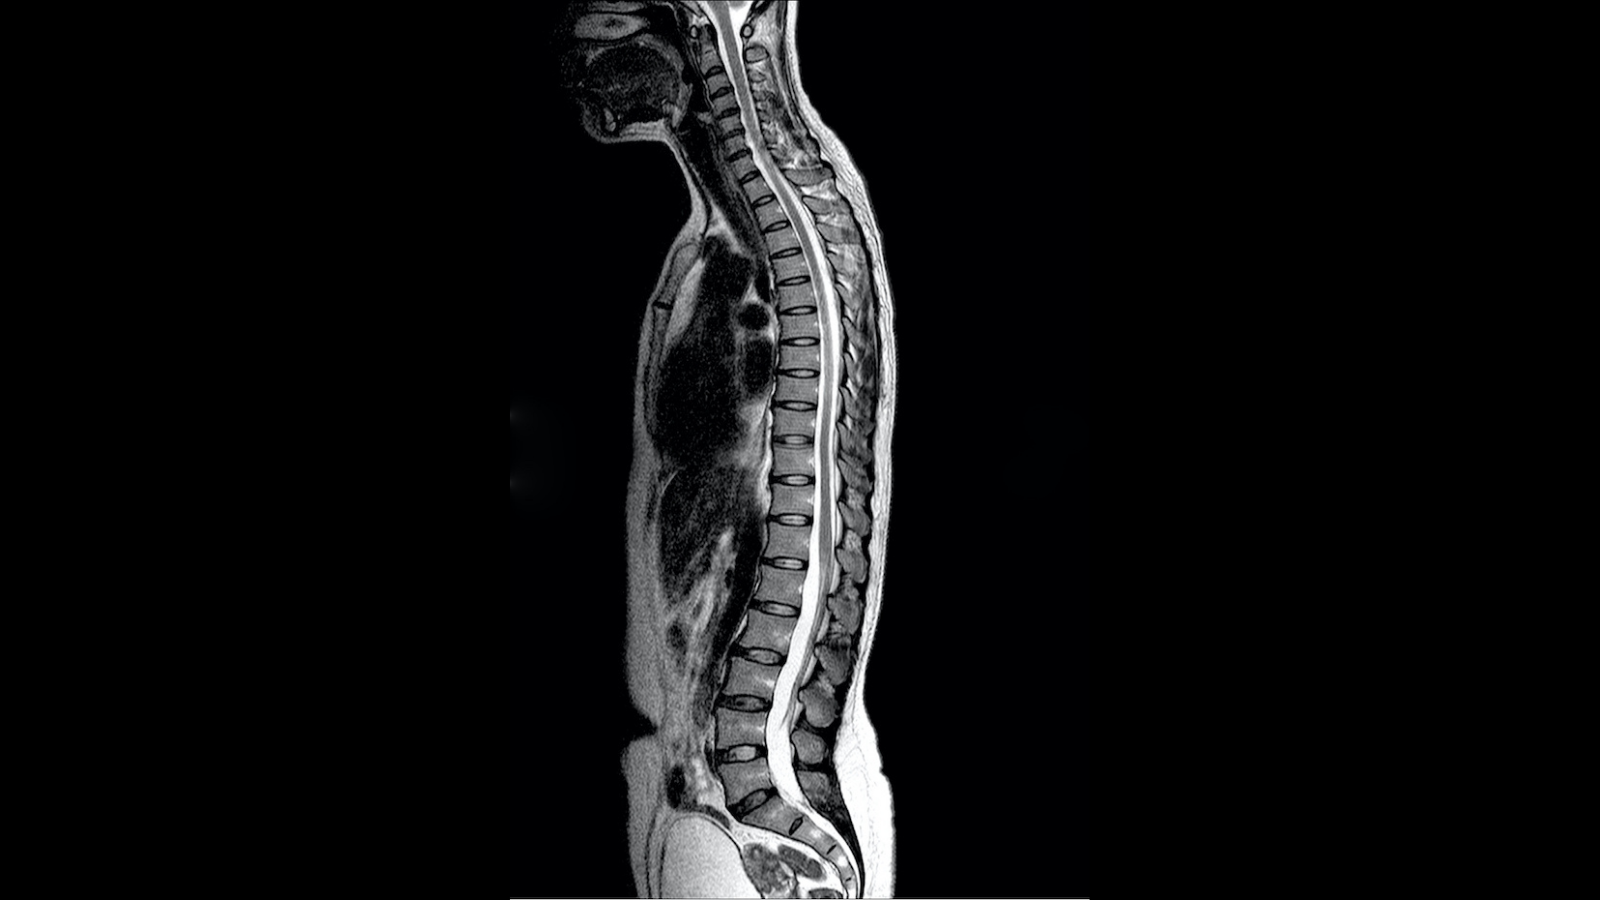 Discogenic pain- Back pain without visible structural disc damage